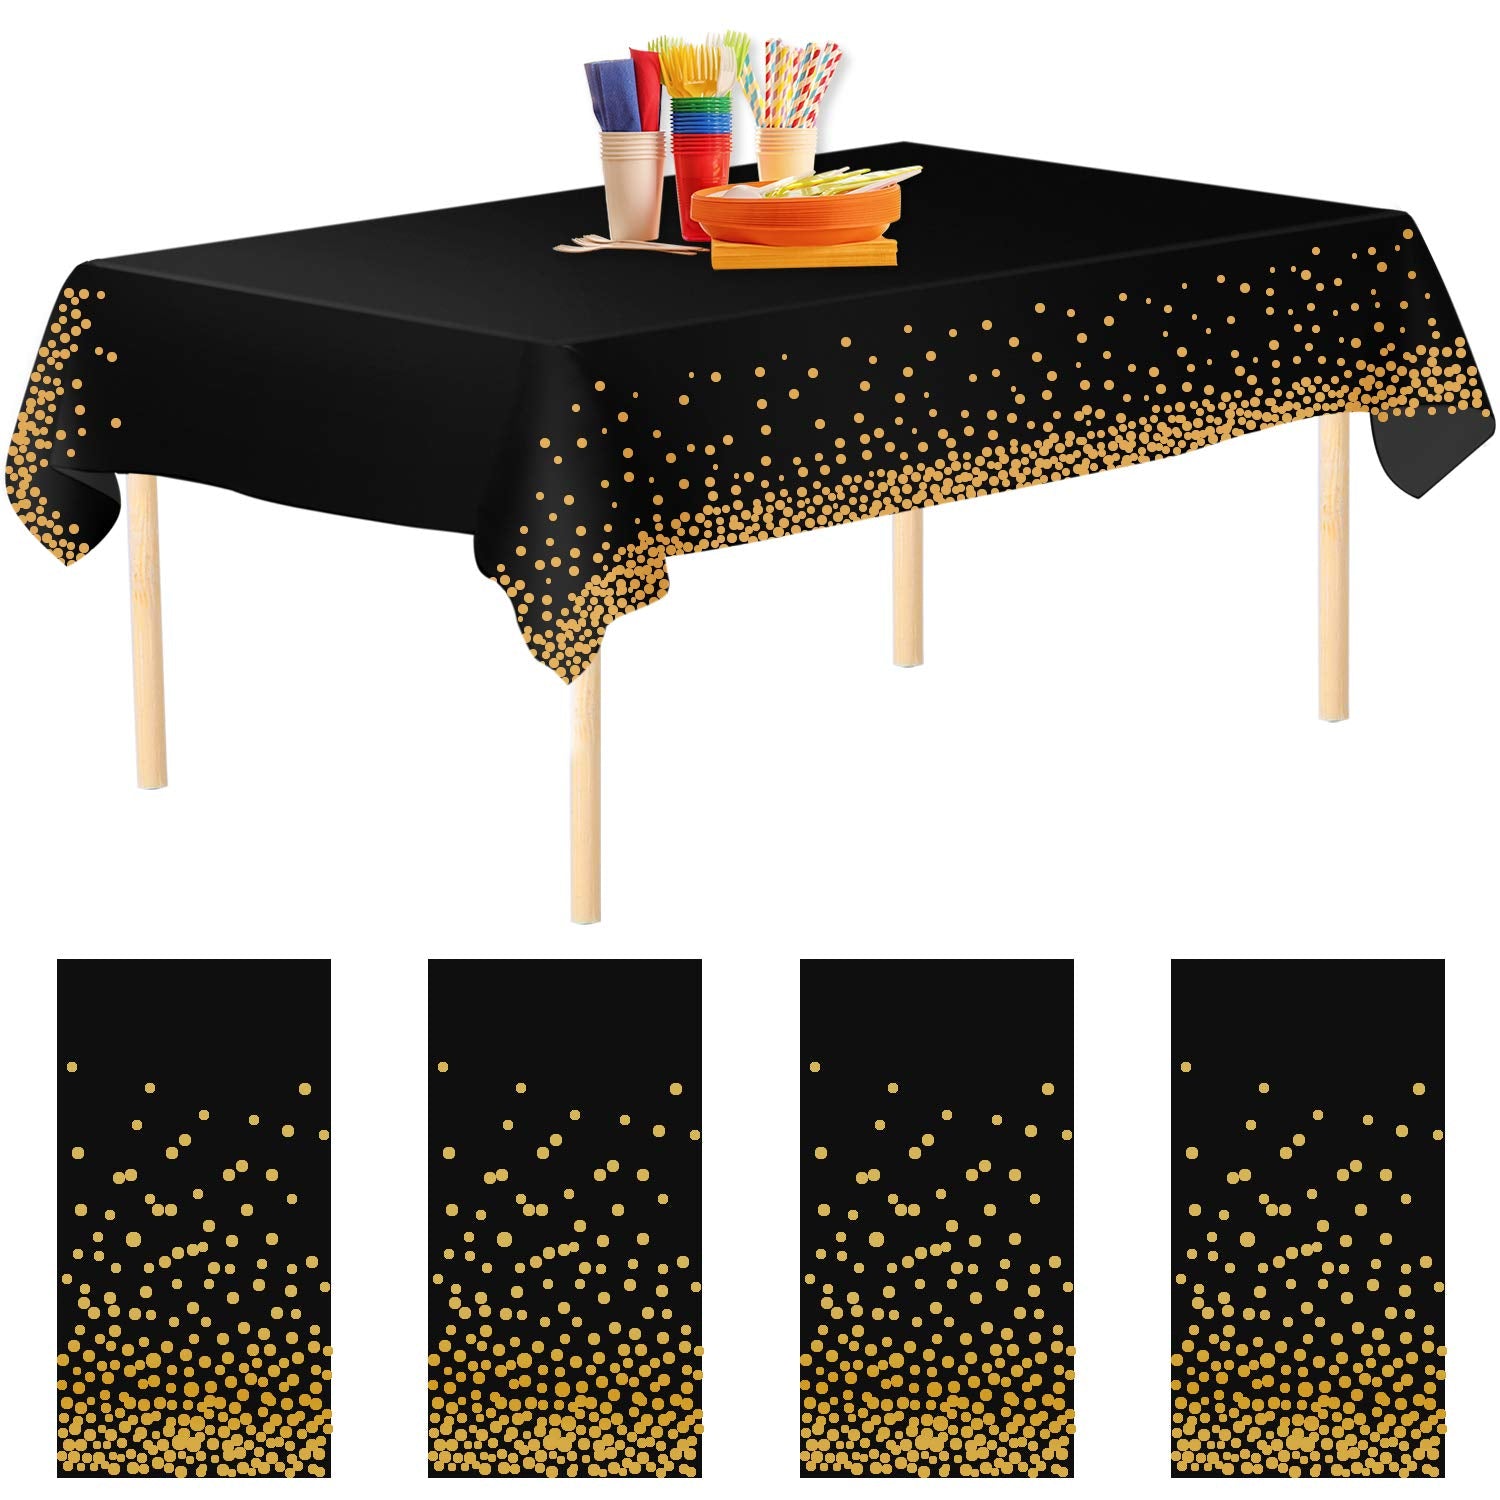 Aneco 4 Pack Black Dot Disposable Tablecloths Table Covers Black Dot Confetti Party Table Cloths Plastic Tablecloths for Indoor or Outdoor Parties Birthdays Weddings Christmas